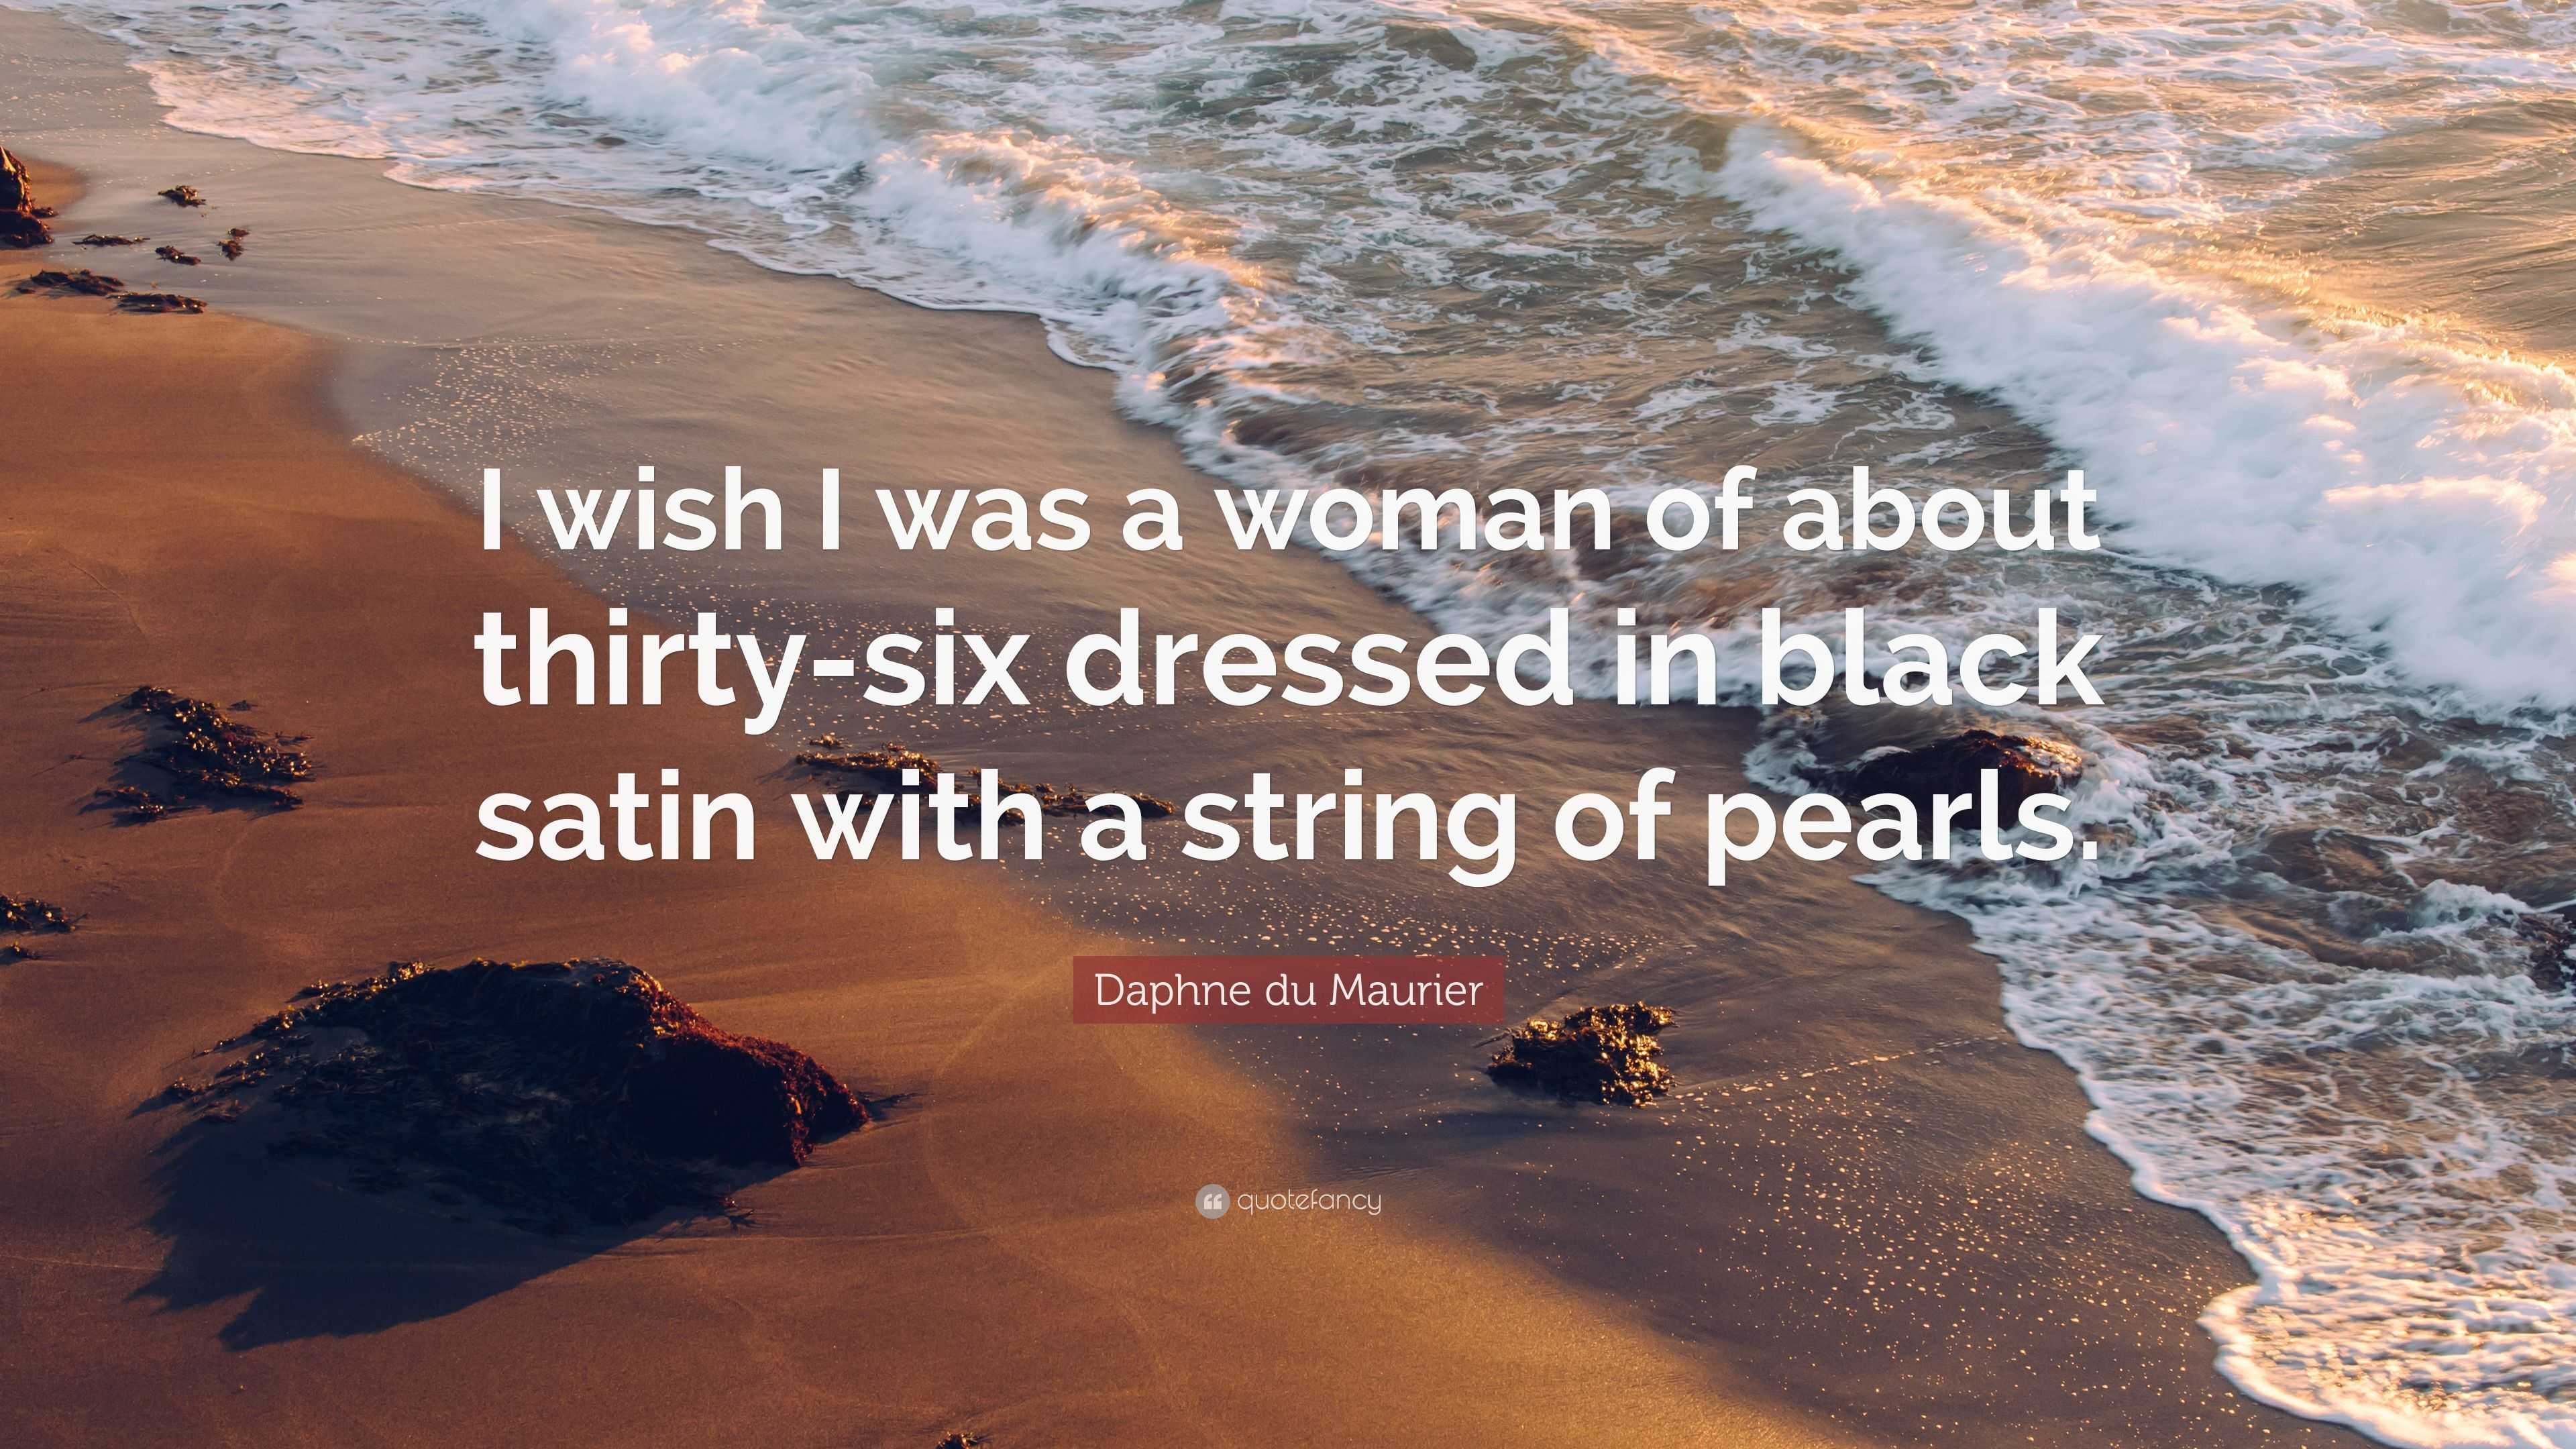 Daphne du Maurier Quote: “I wish I was a woman of about thirty-six